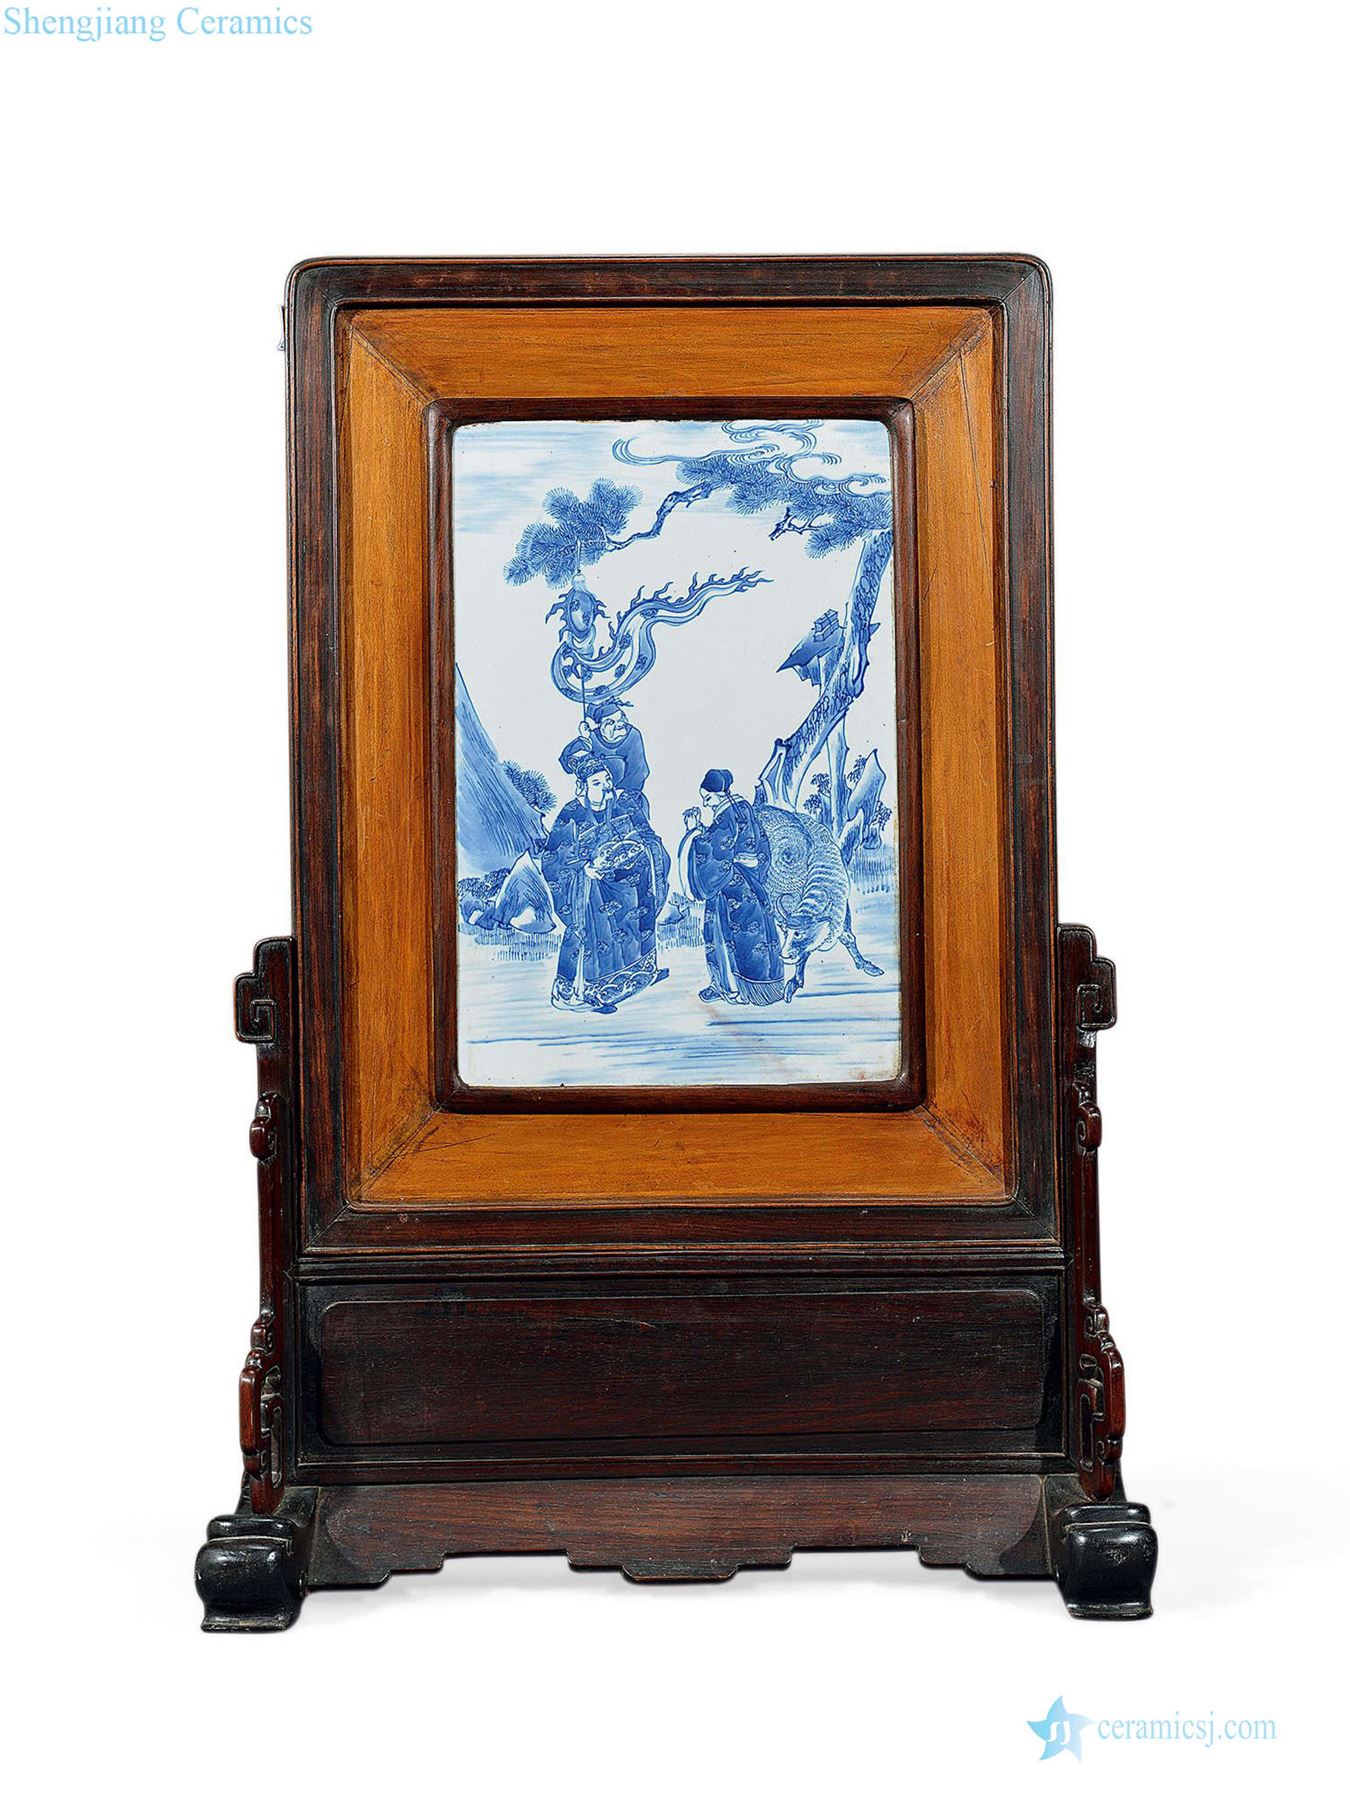 Qing dynasty blue and white porcelain plate characters a screen